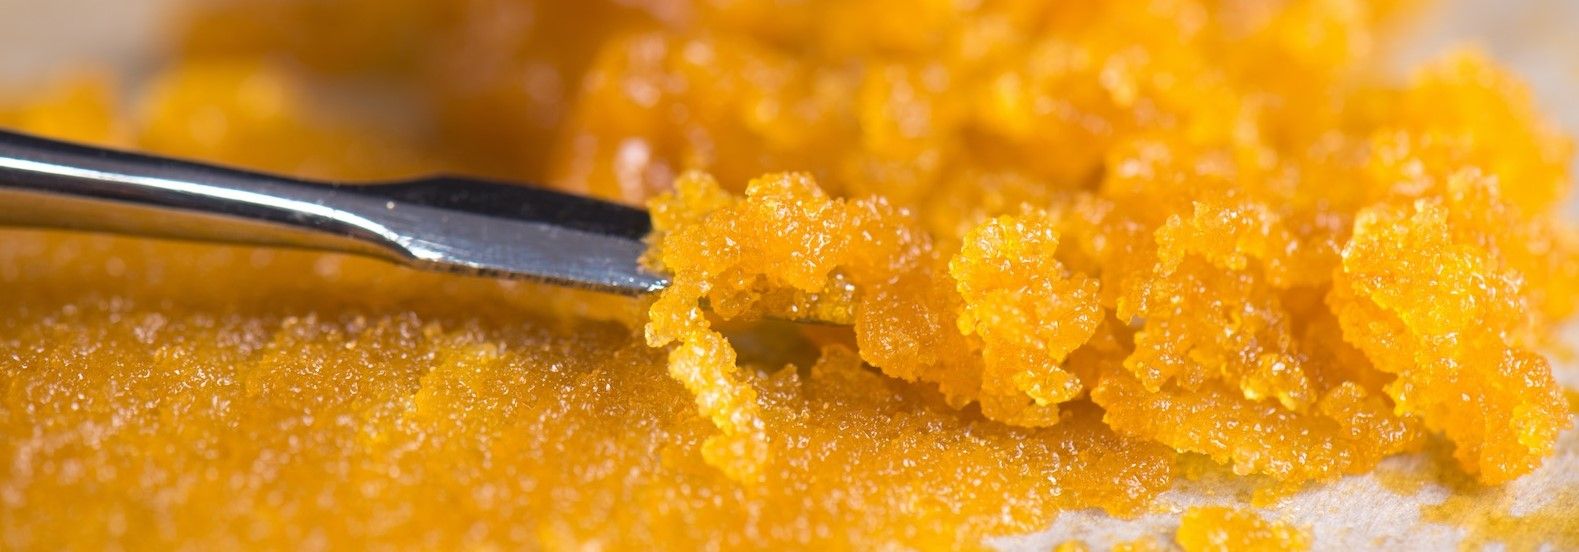 vlive resin the complete guide Live Resin: The Complete Guide